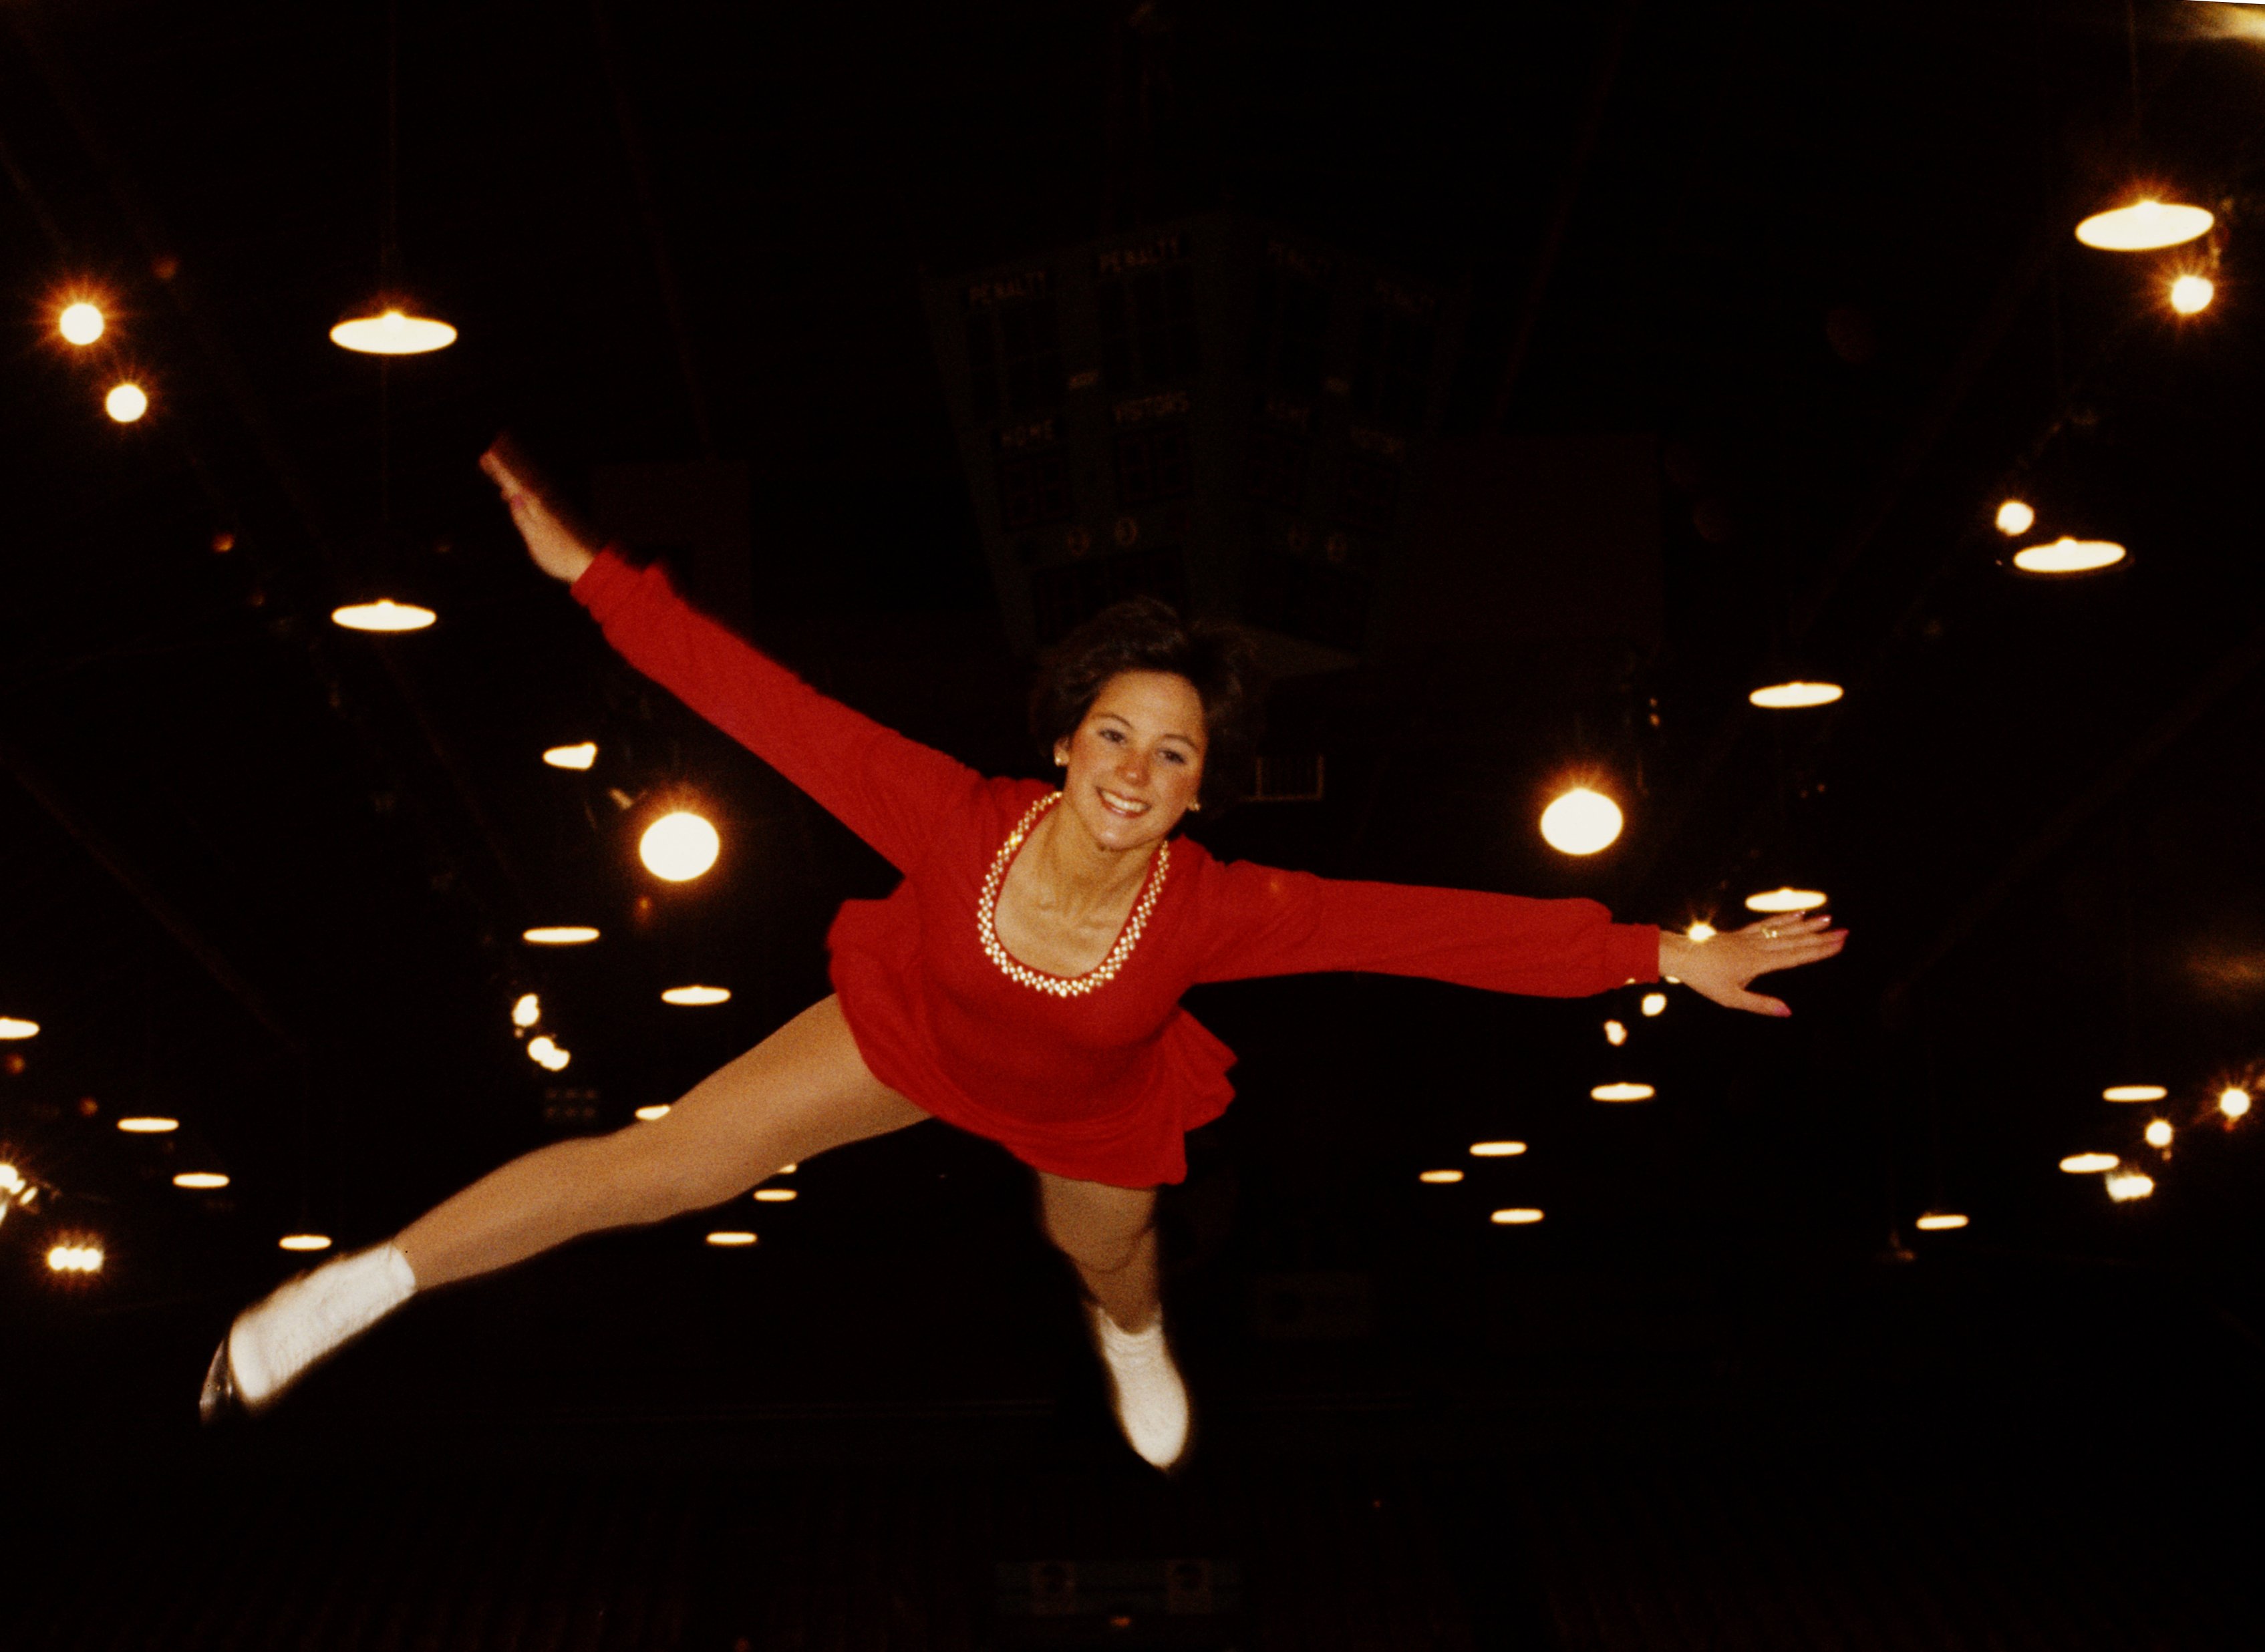 Dorothy Hamill at the World Figure Skating Championships in 1975 in Colorado Springs | Source: Getty Imges